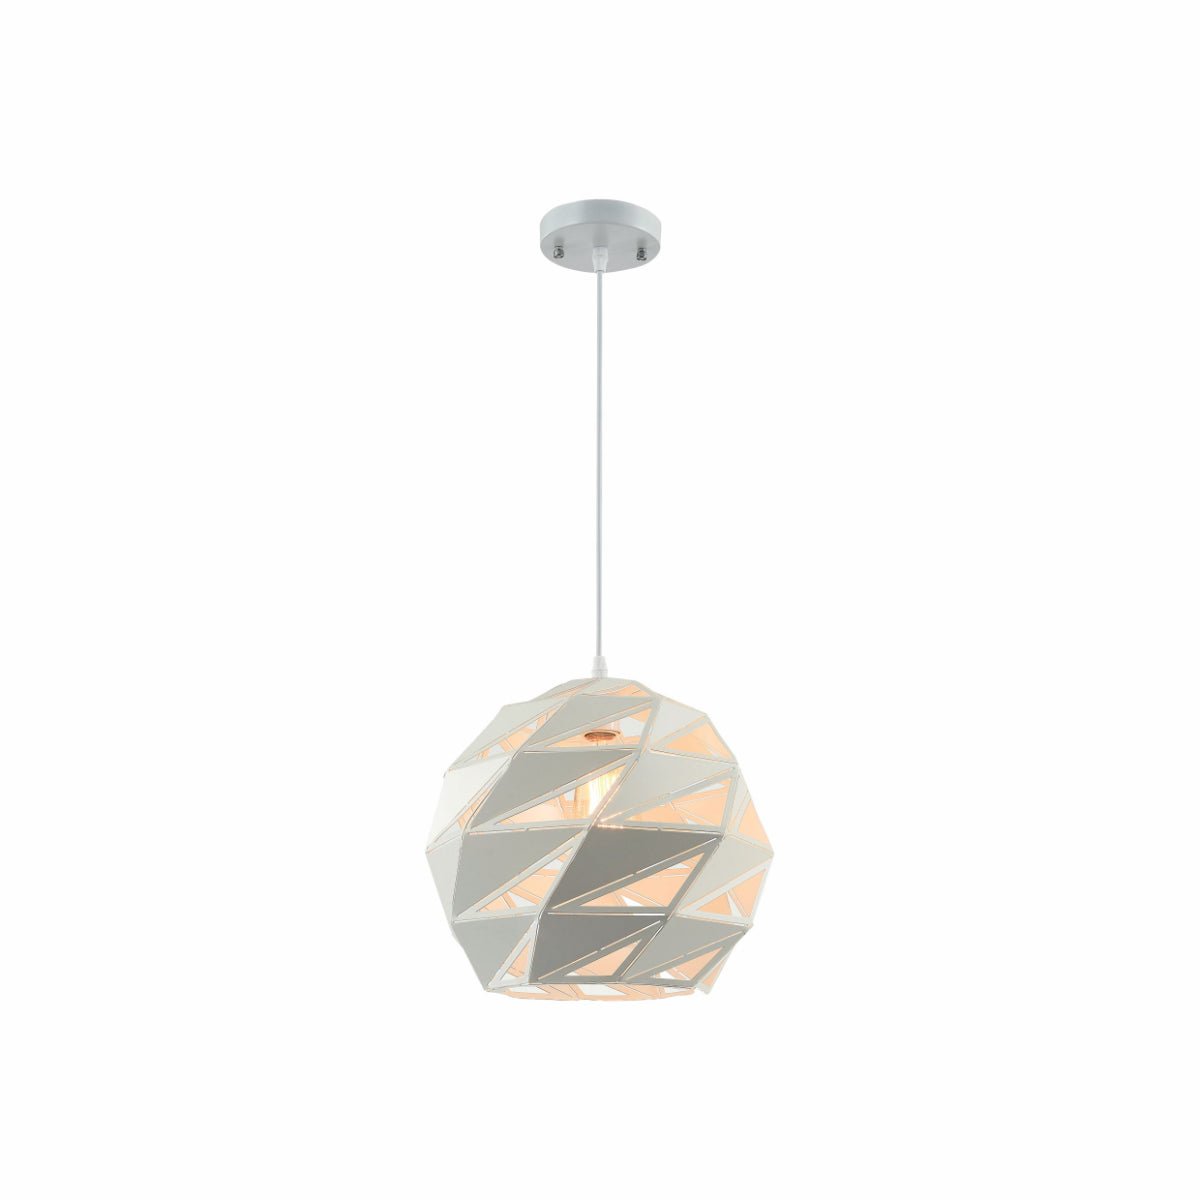 Main image of White Metal Globe Polyhedral Pendant Ceiling Light with E27 | TEKLED 150-18270